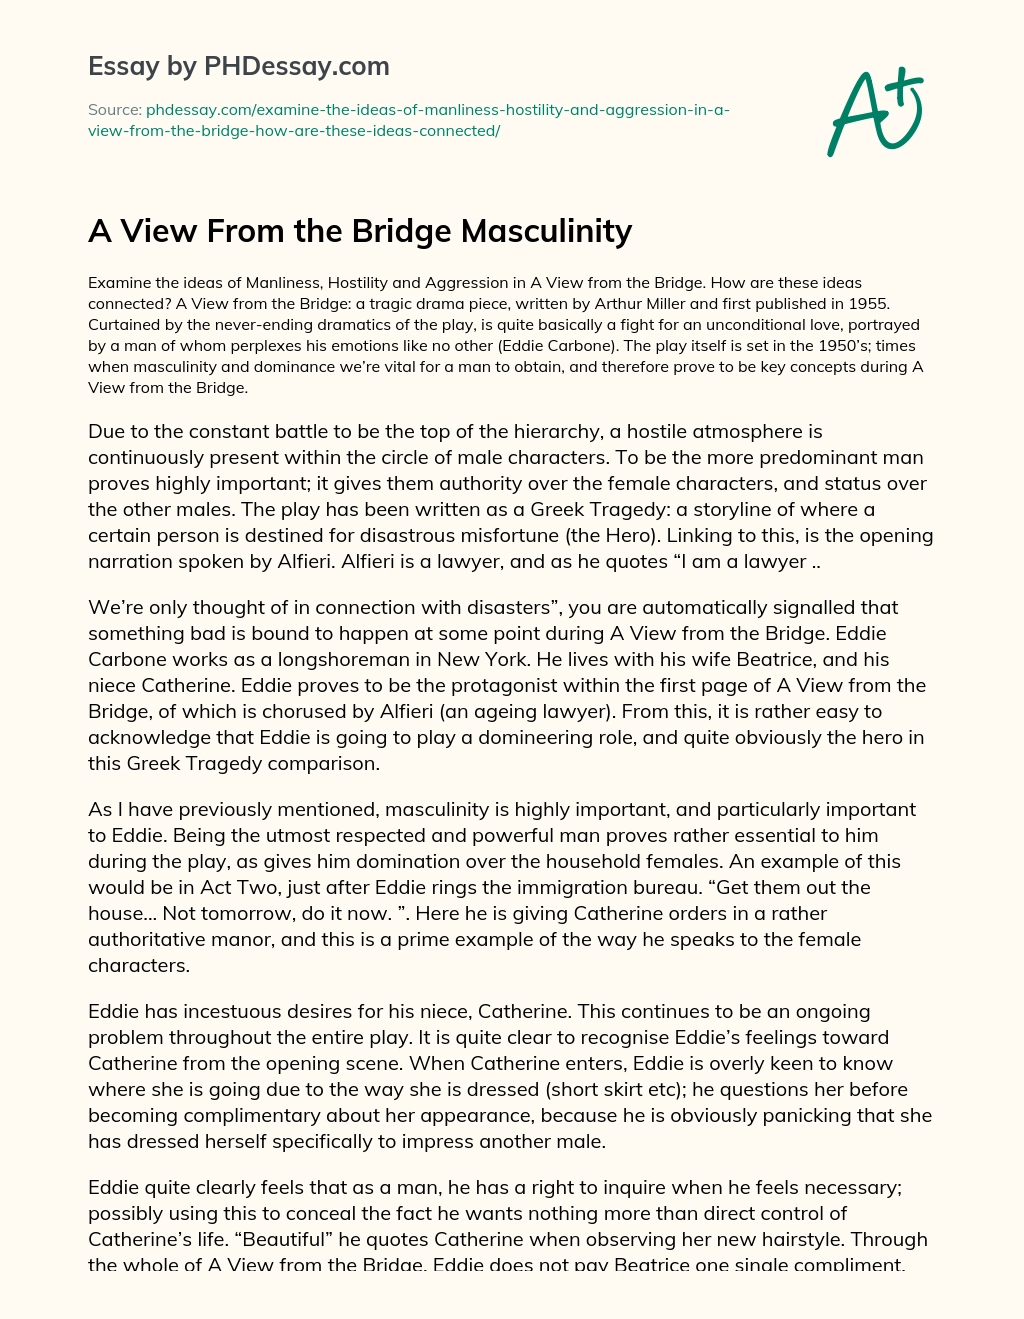 A View From the Bridge Masculinity essay